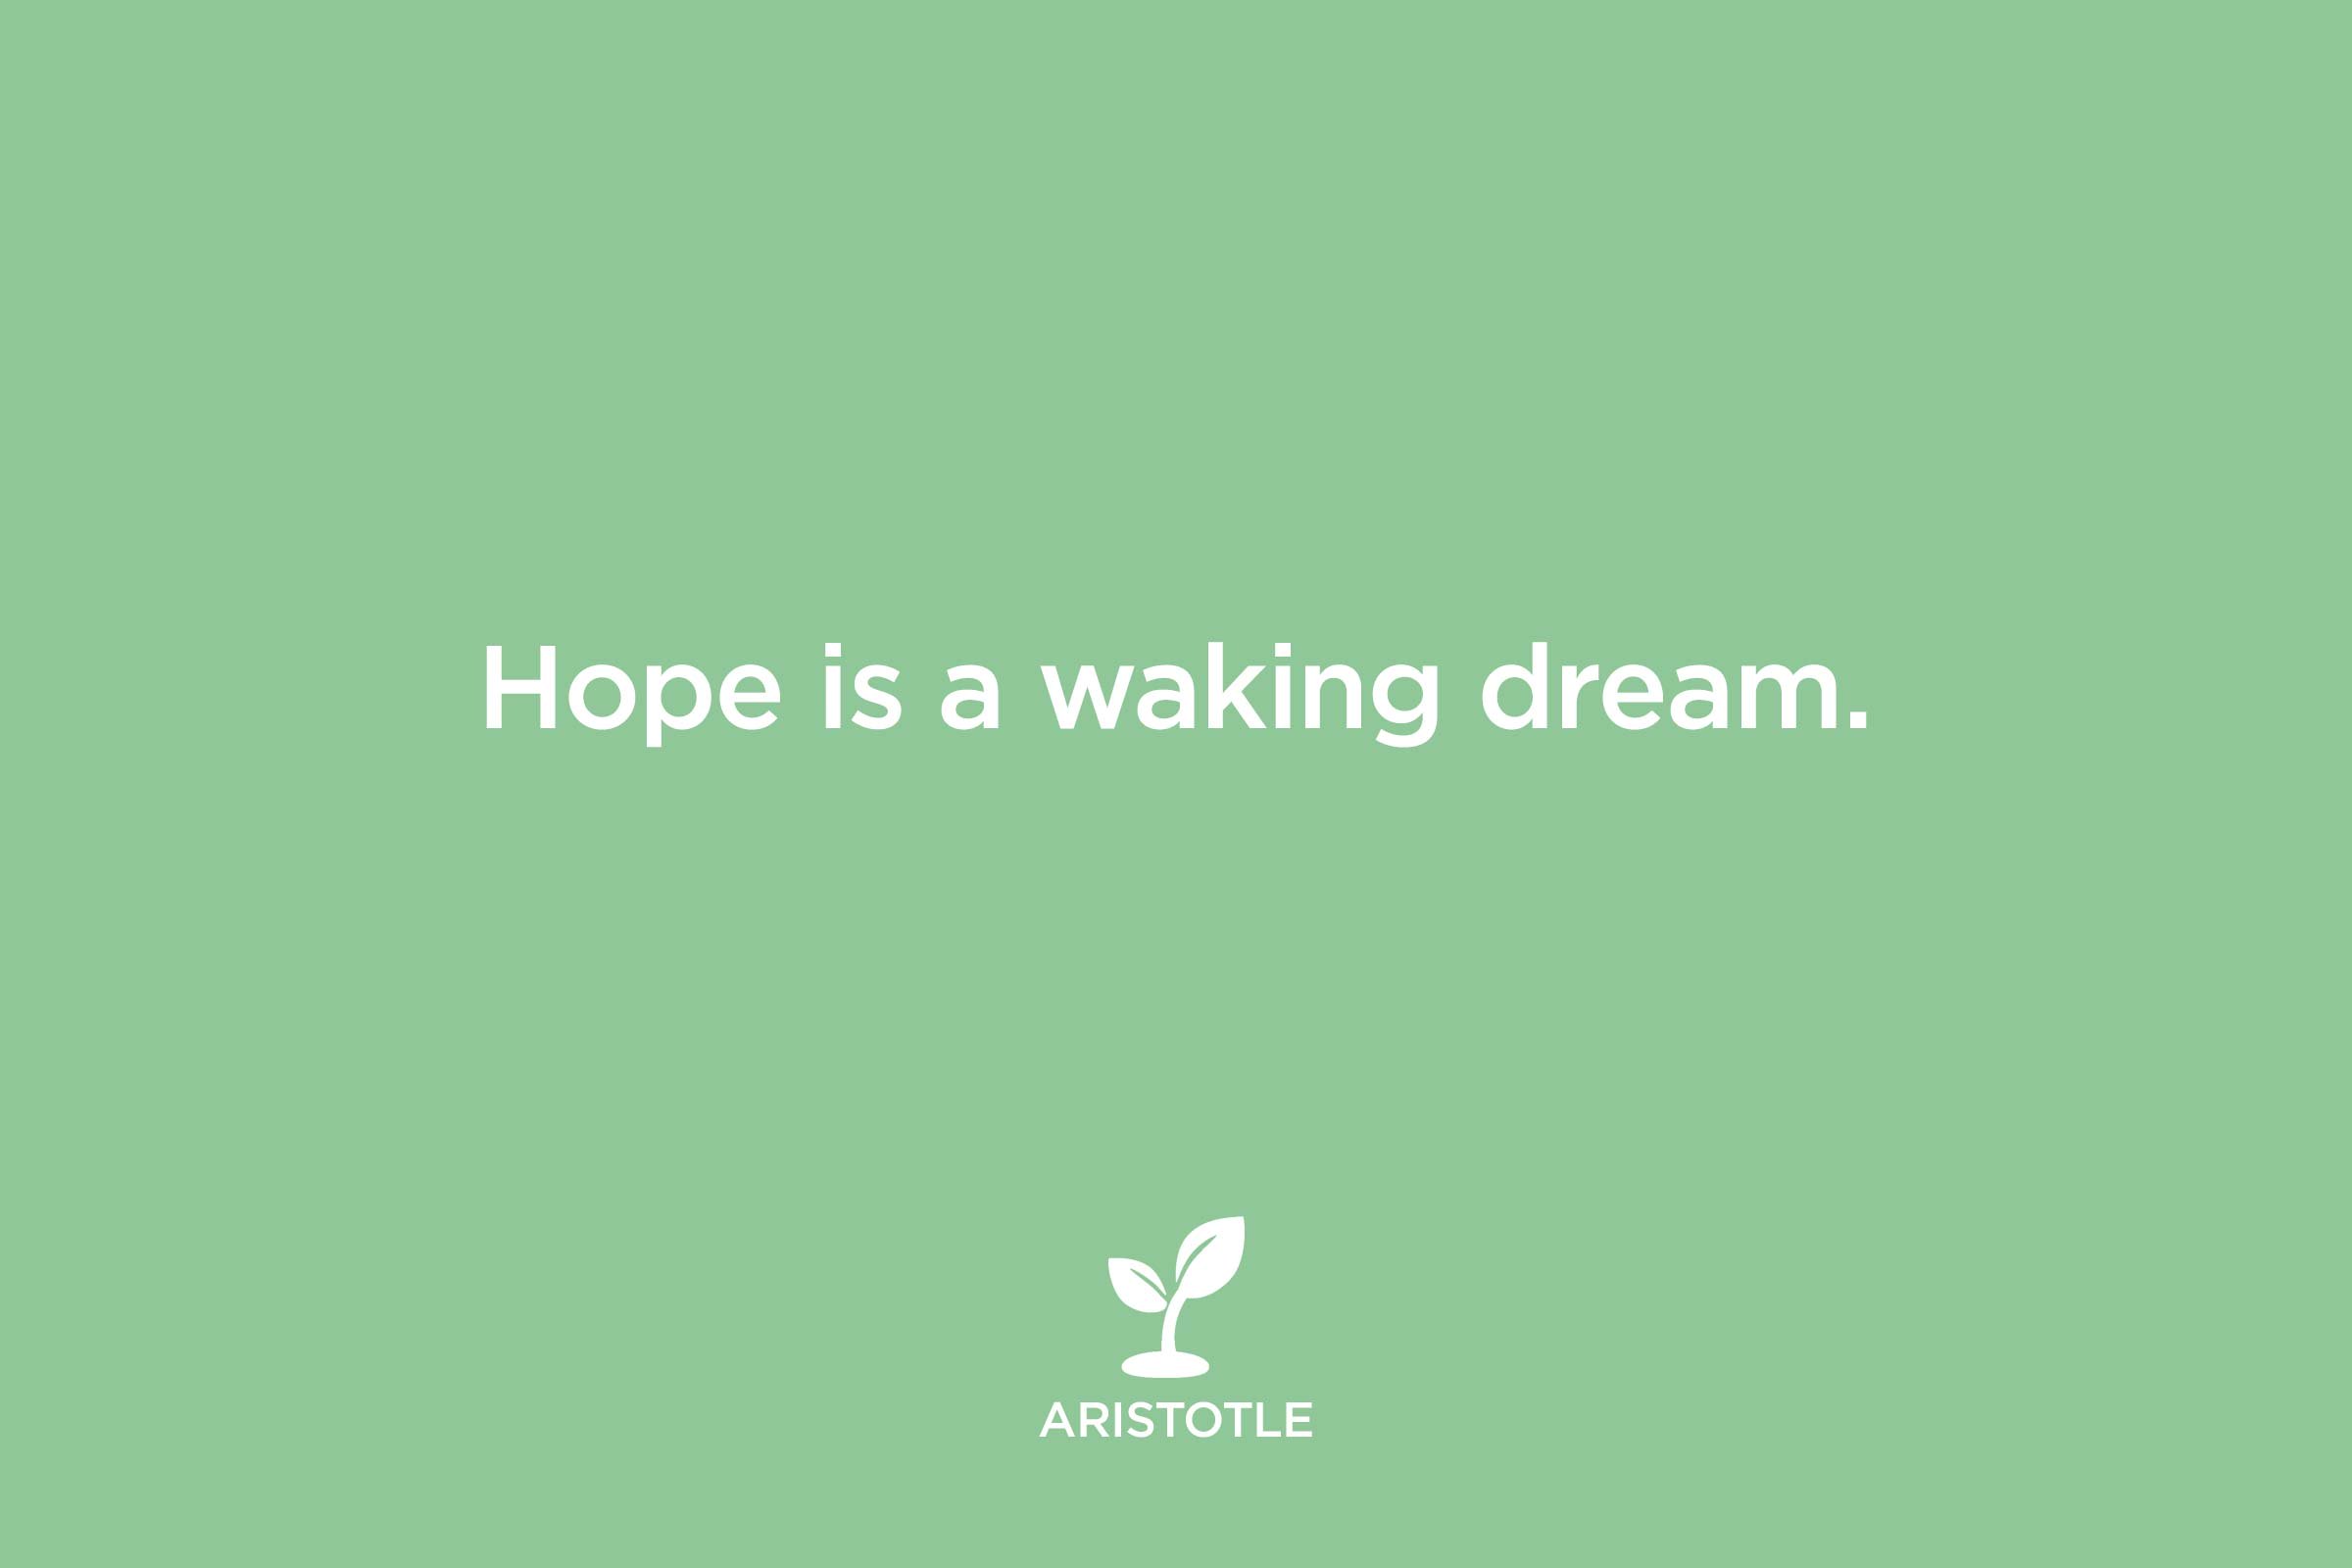 hope is a waking dream. aristotle